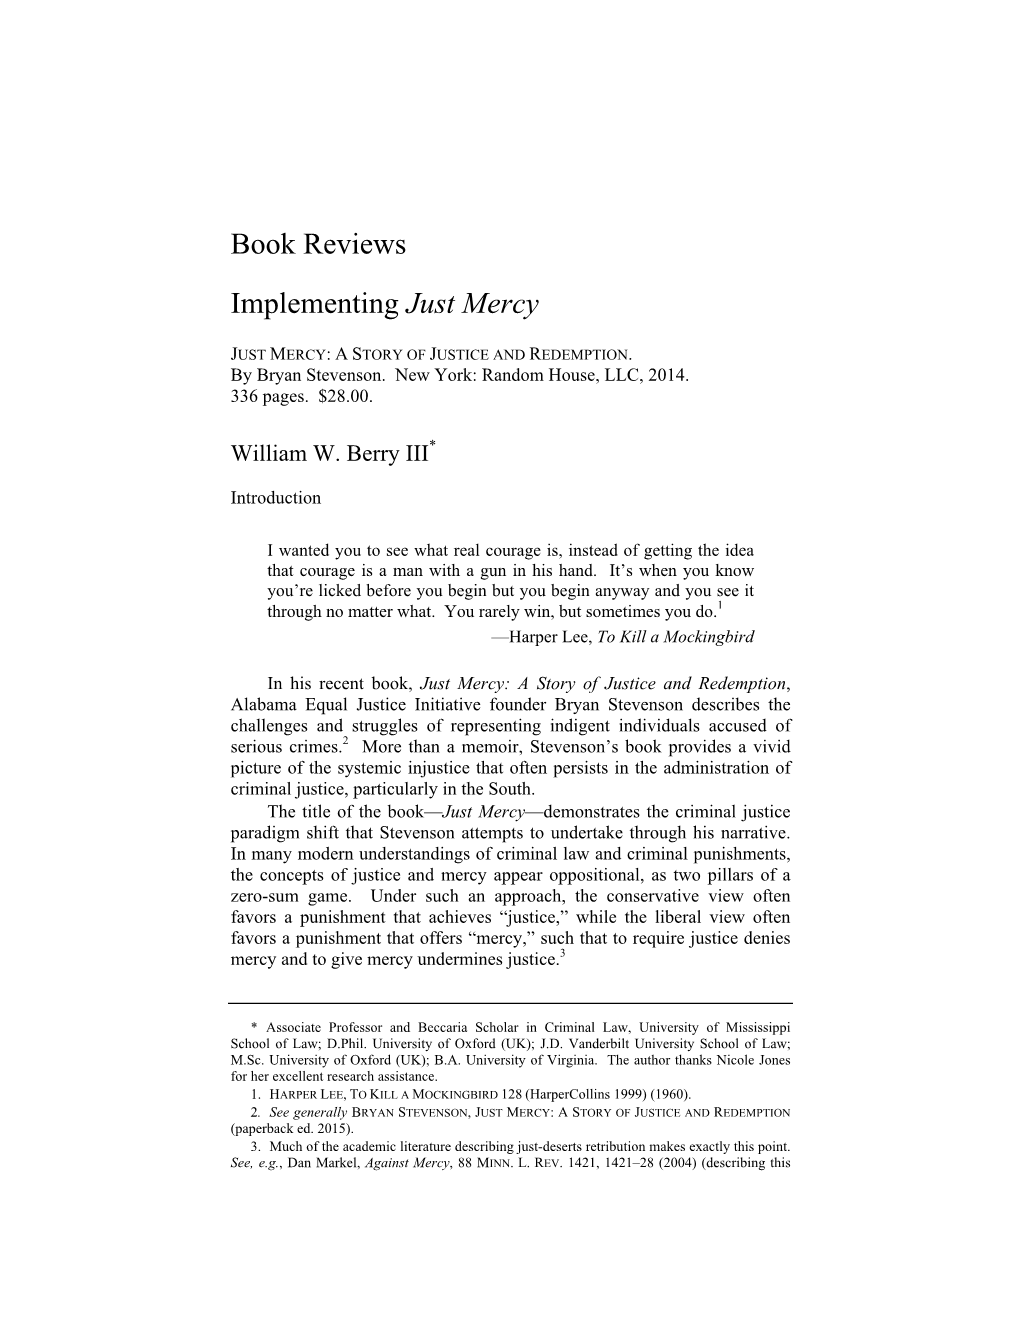 Book Reviews Implementing Just Mercy